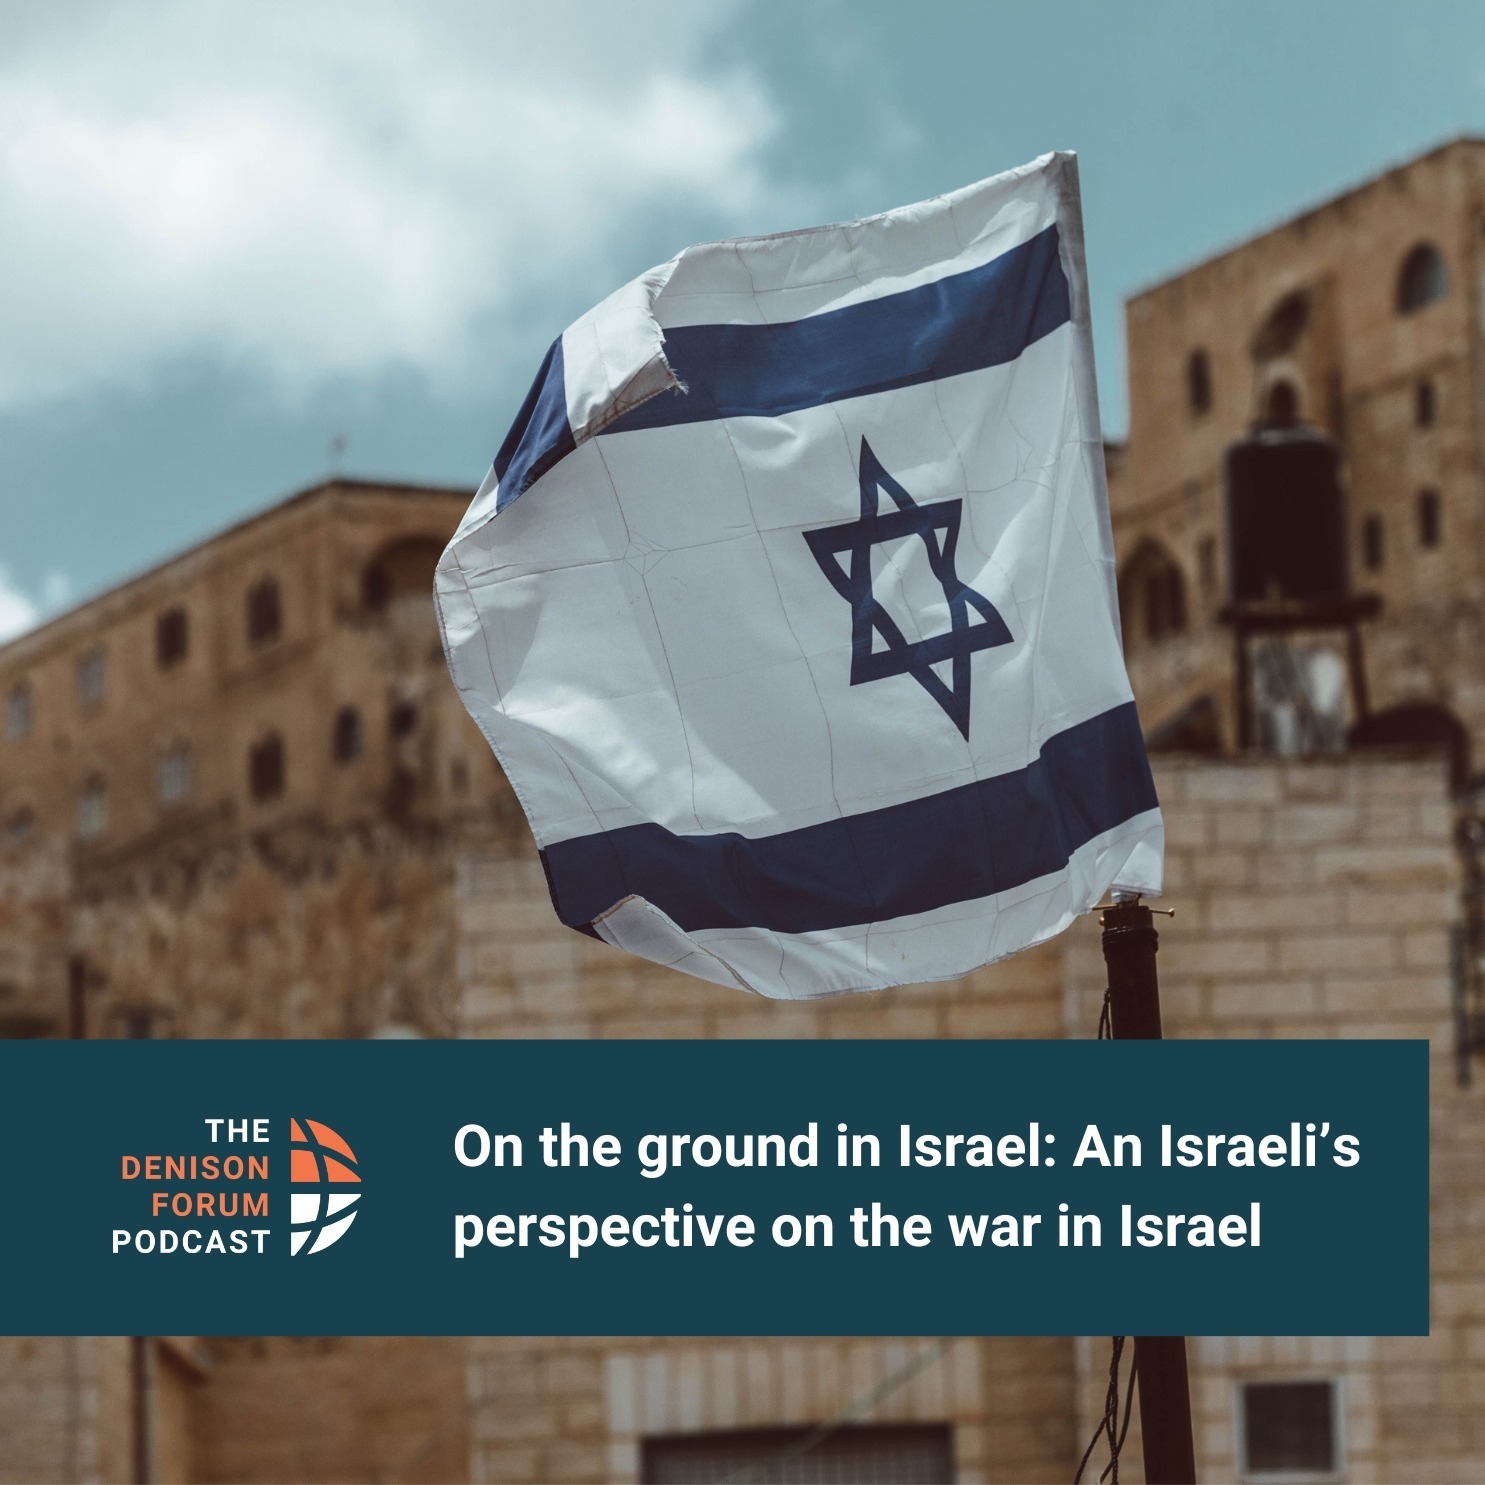 On the ground in Israel: An Israeli's perspective on the war